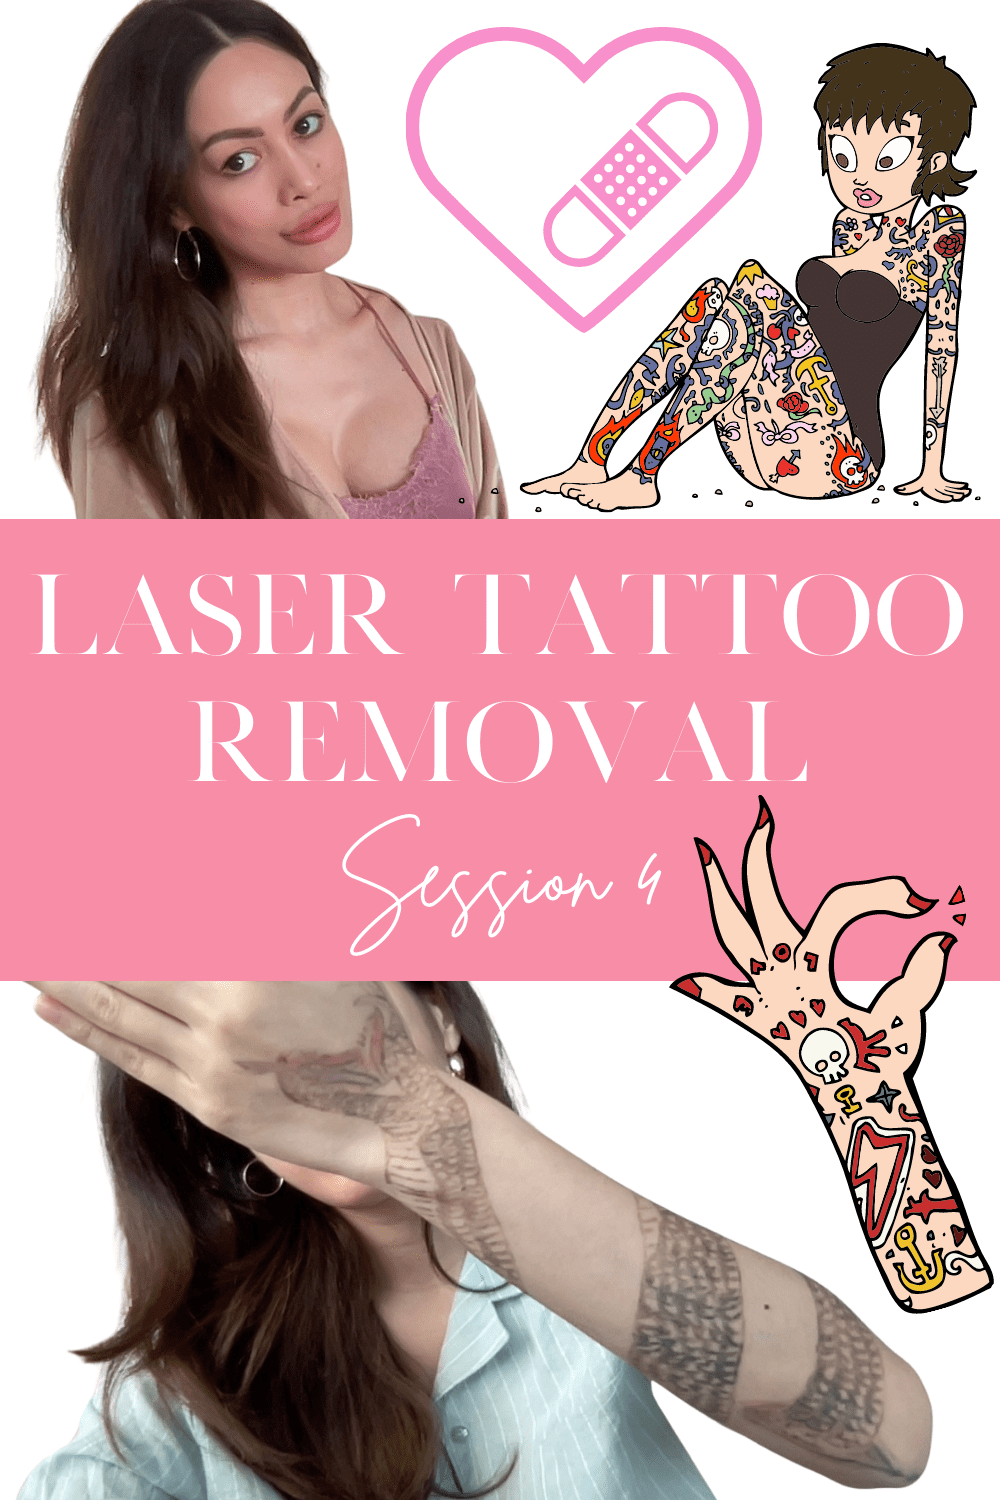 LaserAway Tattoo Removal Session 4